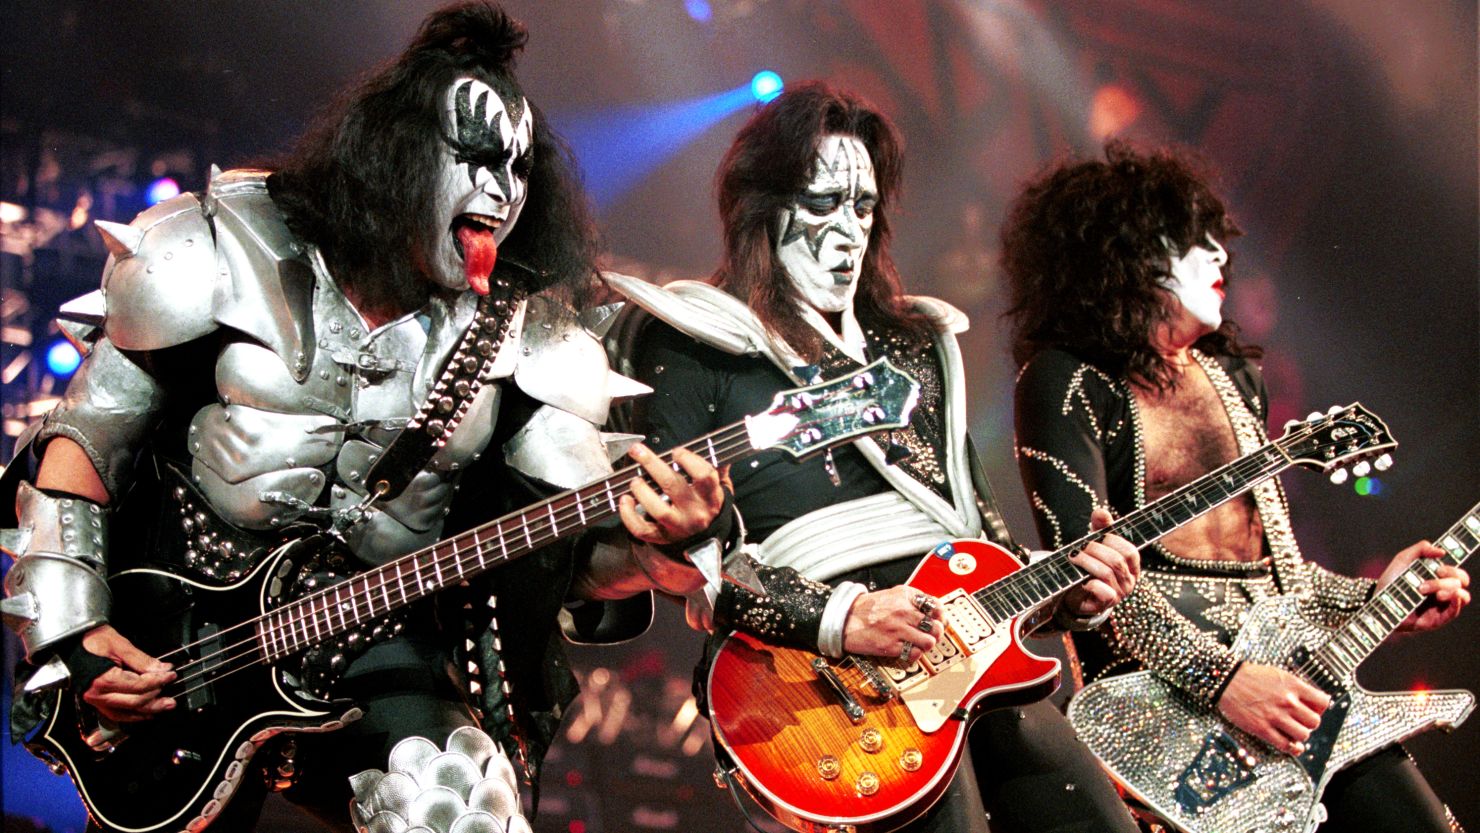 The rock band Kiss will join Def Leppard on tour for summer 2014.